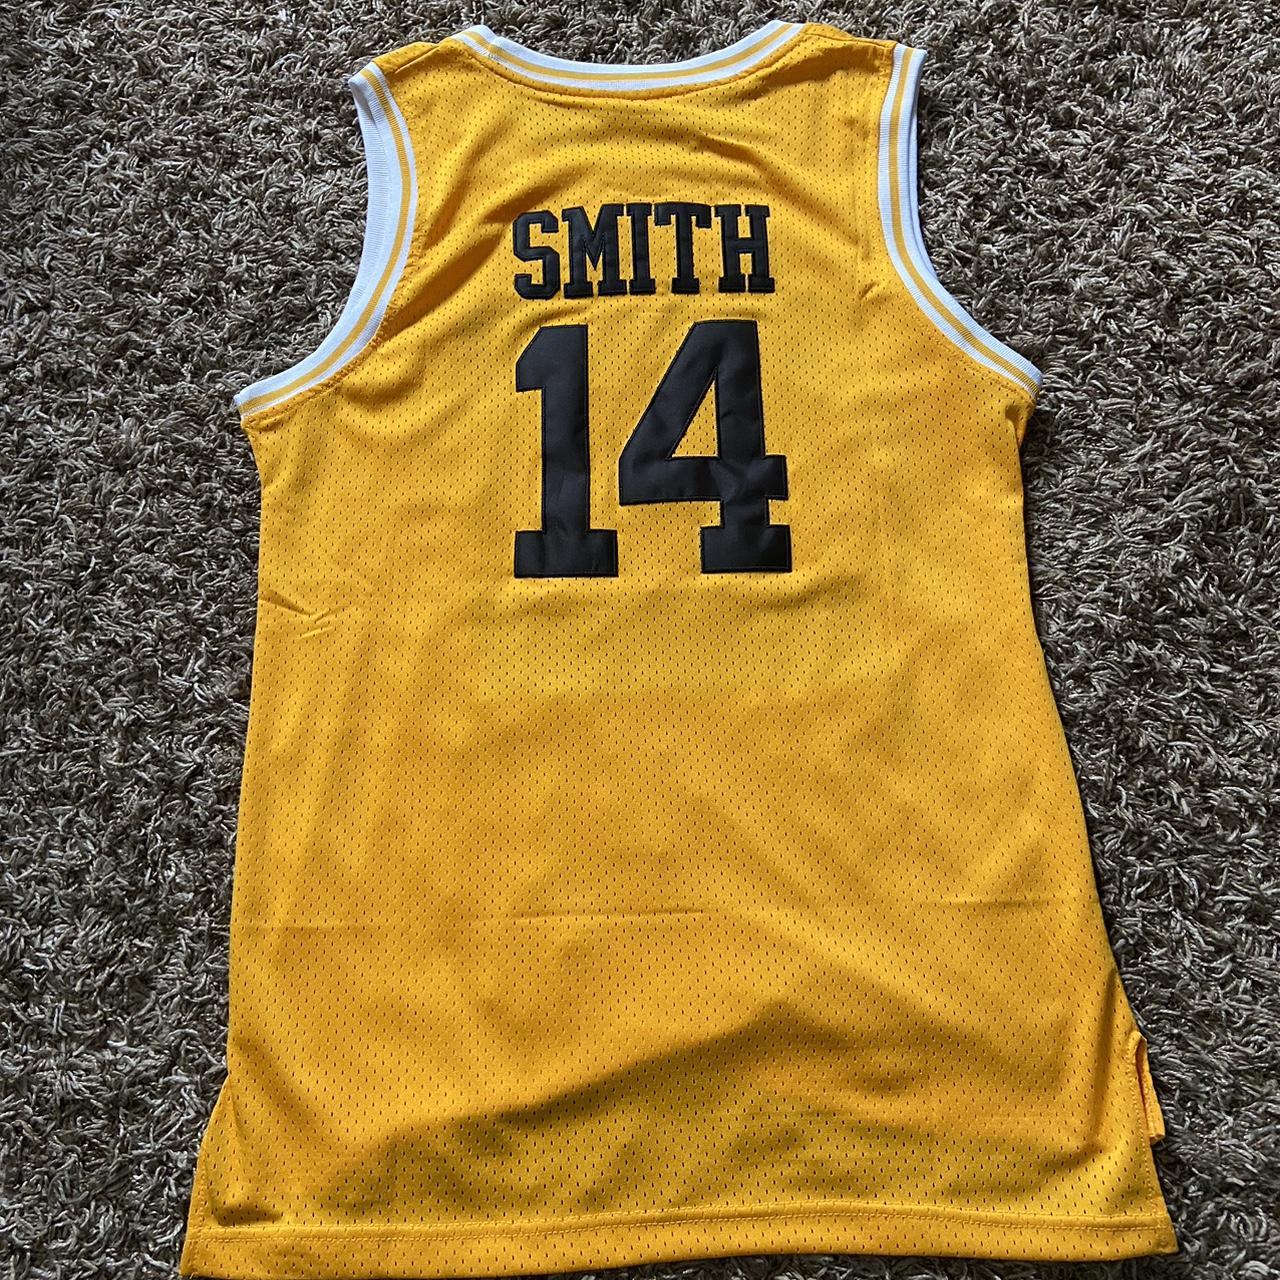 Stitched Bell-Air Academy “WILL SMITH” Jersey We - Depop